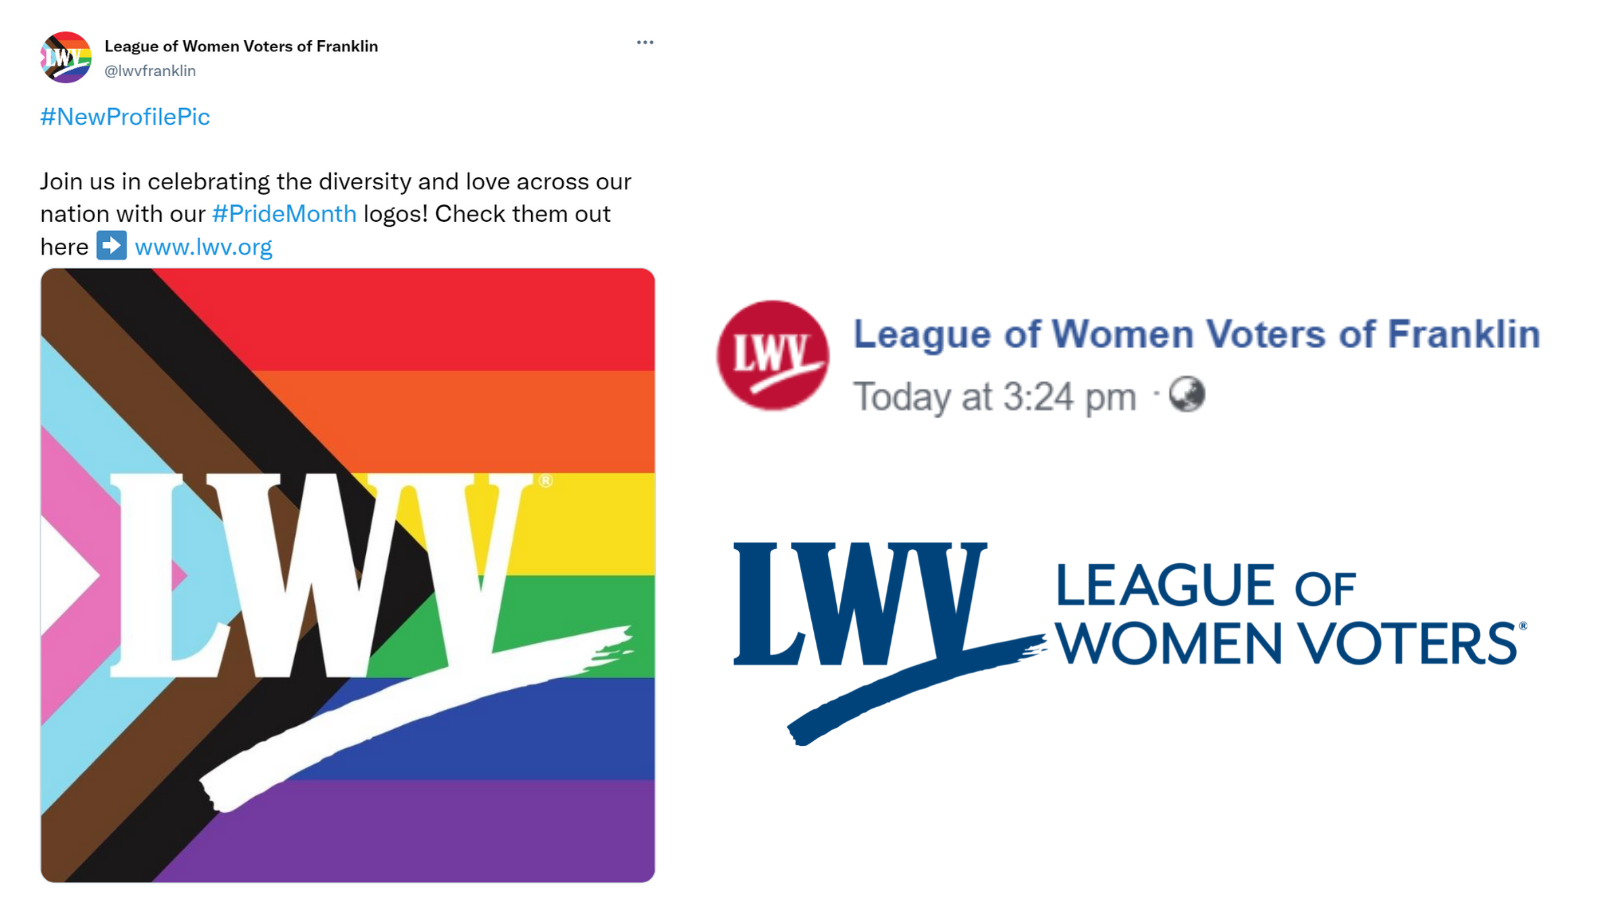 Collage of alternate LWV logos. Featured is a sample Twitter post from LWV Franklin with the LWV pride logo, a "League of Women Voters of Franklin" sample Facebook profile using the LWV red logo, and the blue "League of Women Voters" logo.